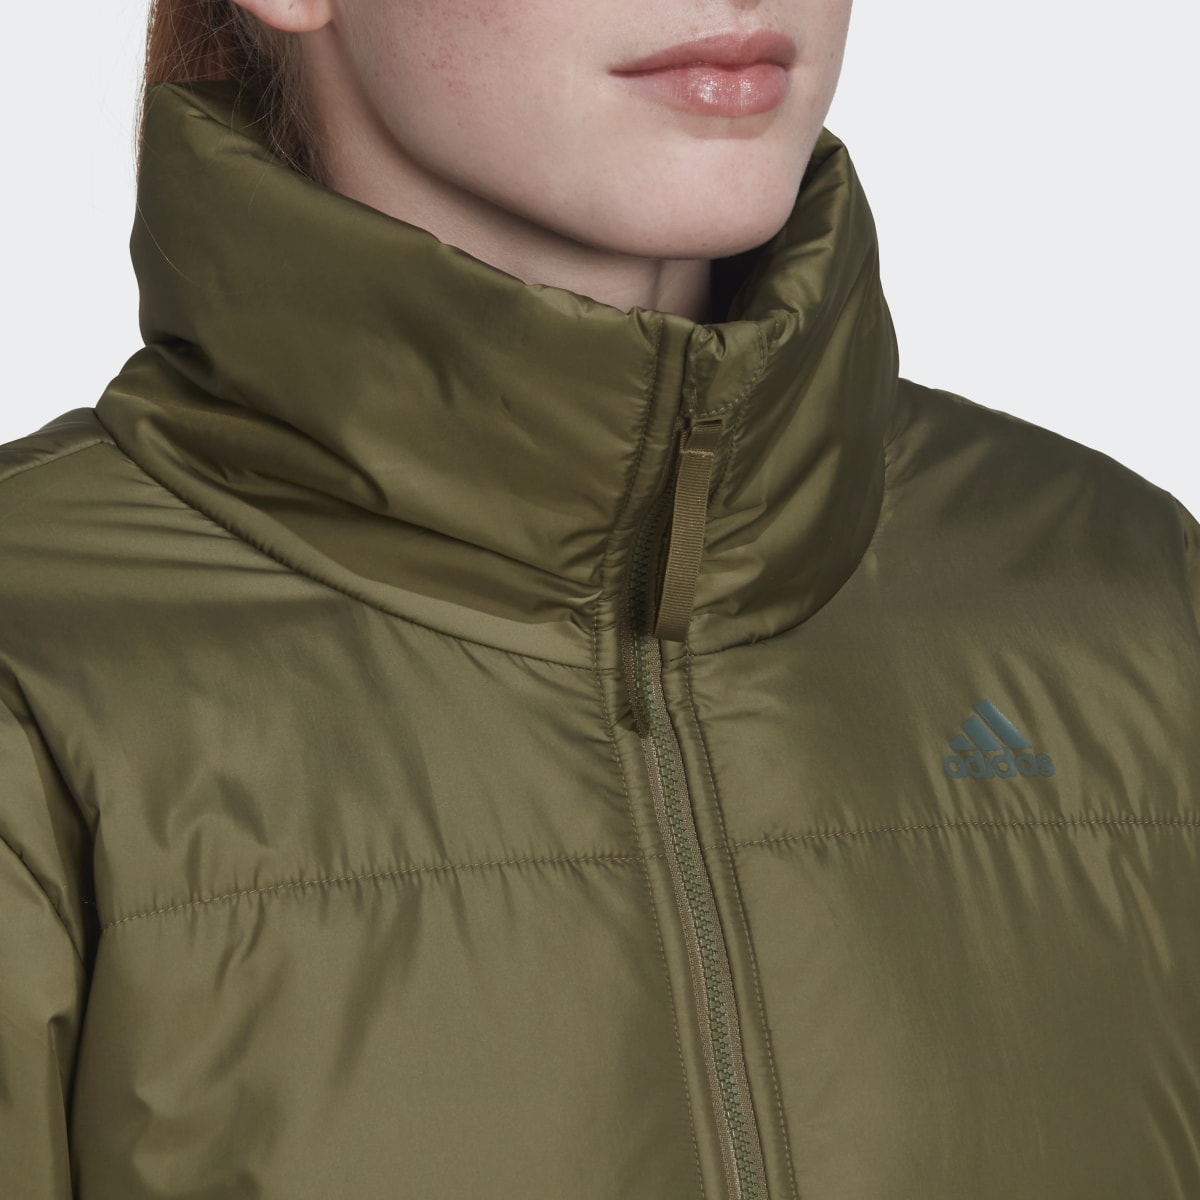 Adidas BSC Insulated Jacket. 8